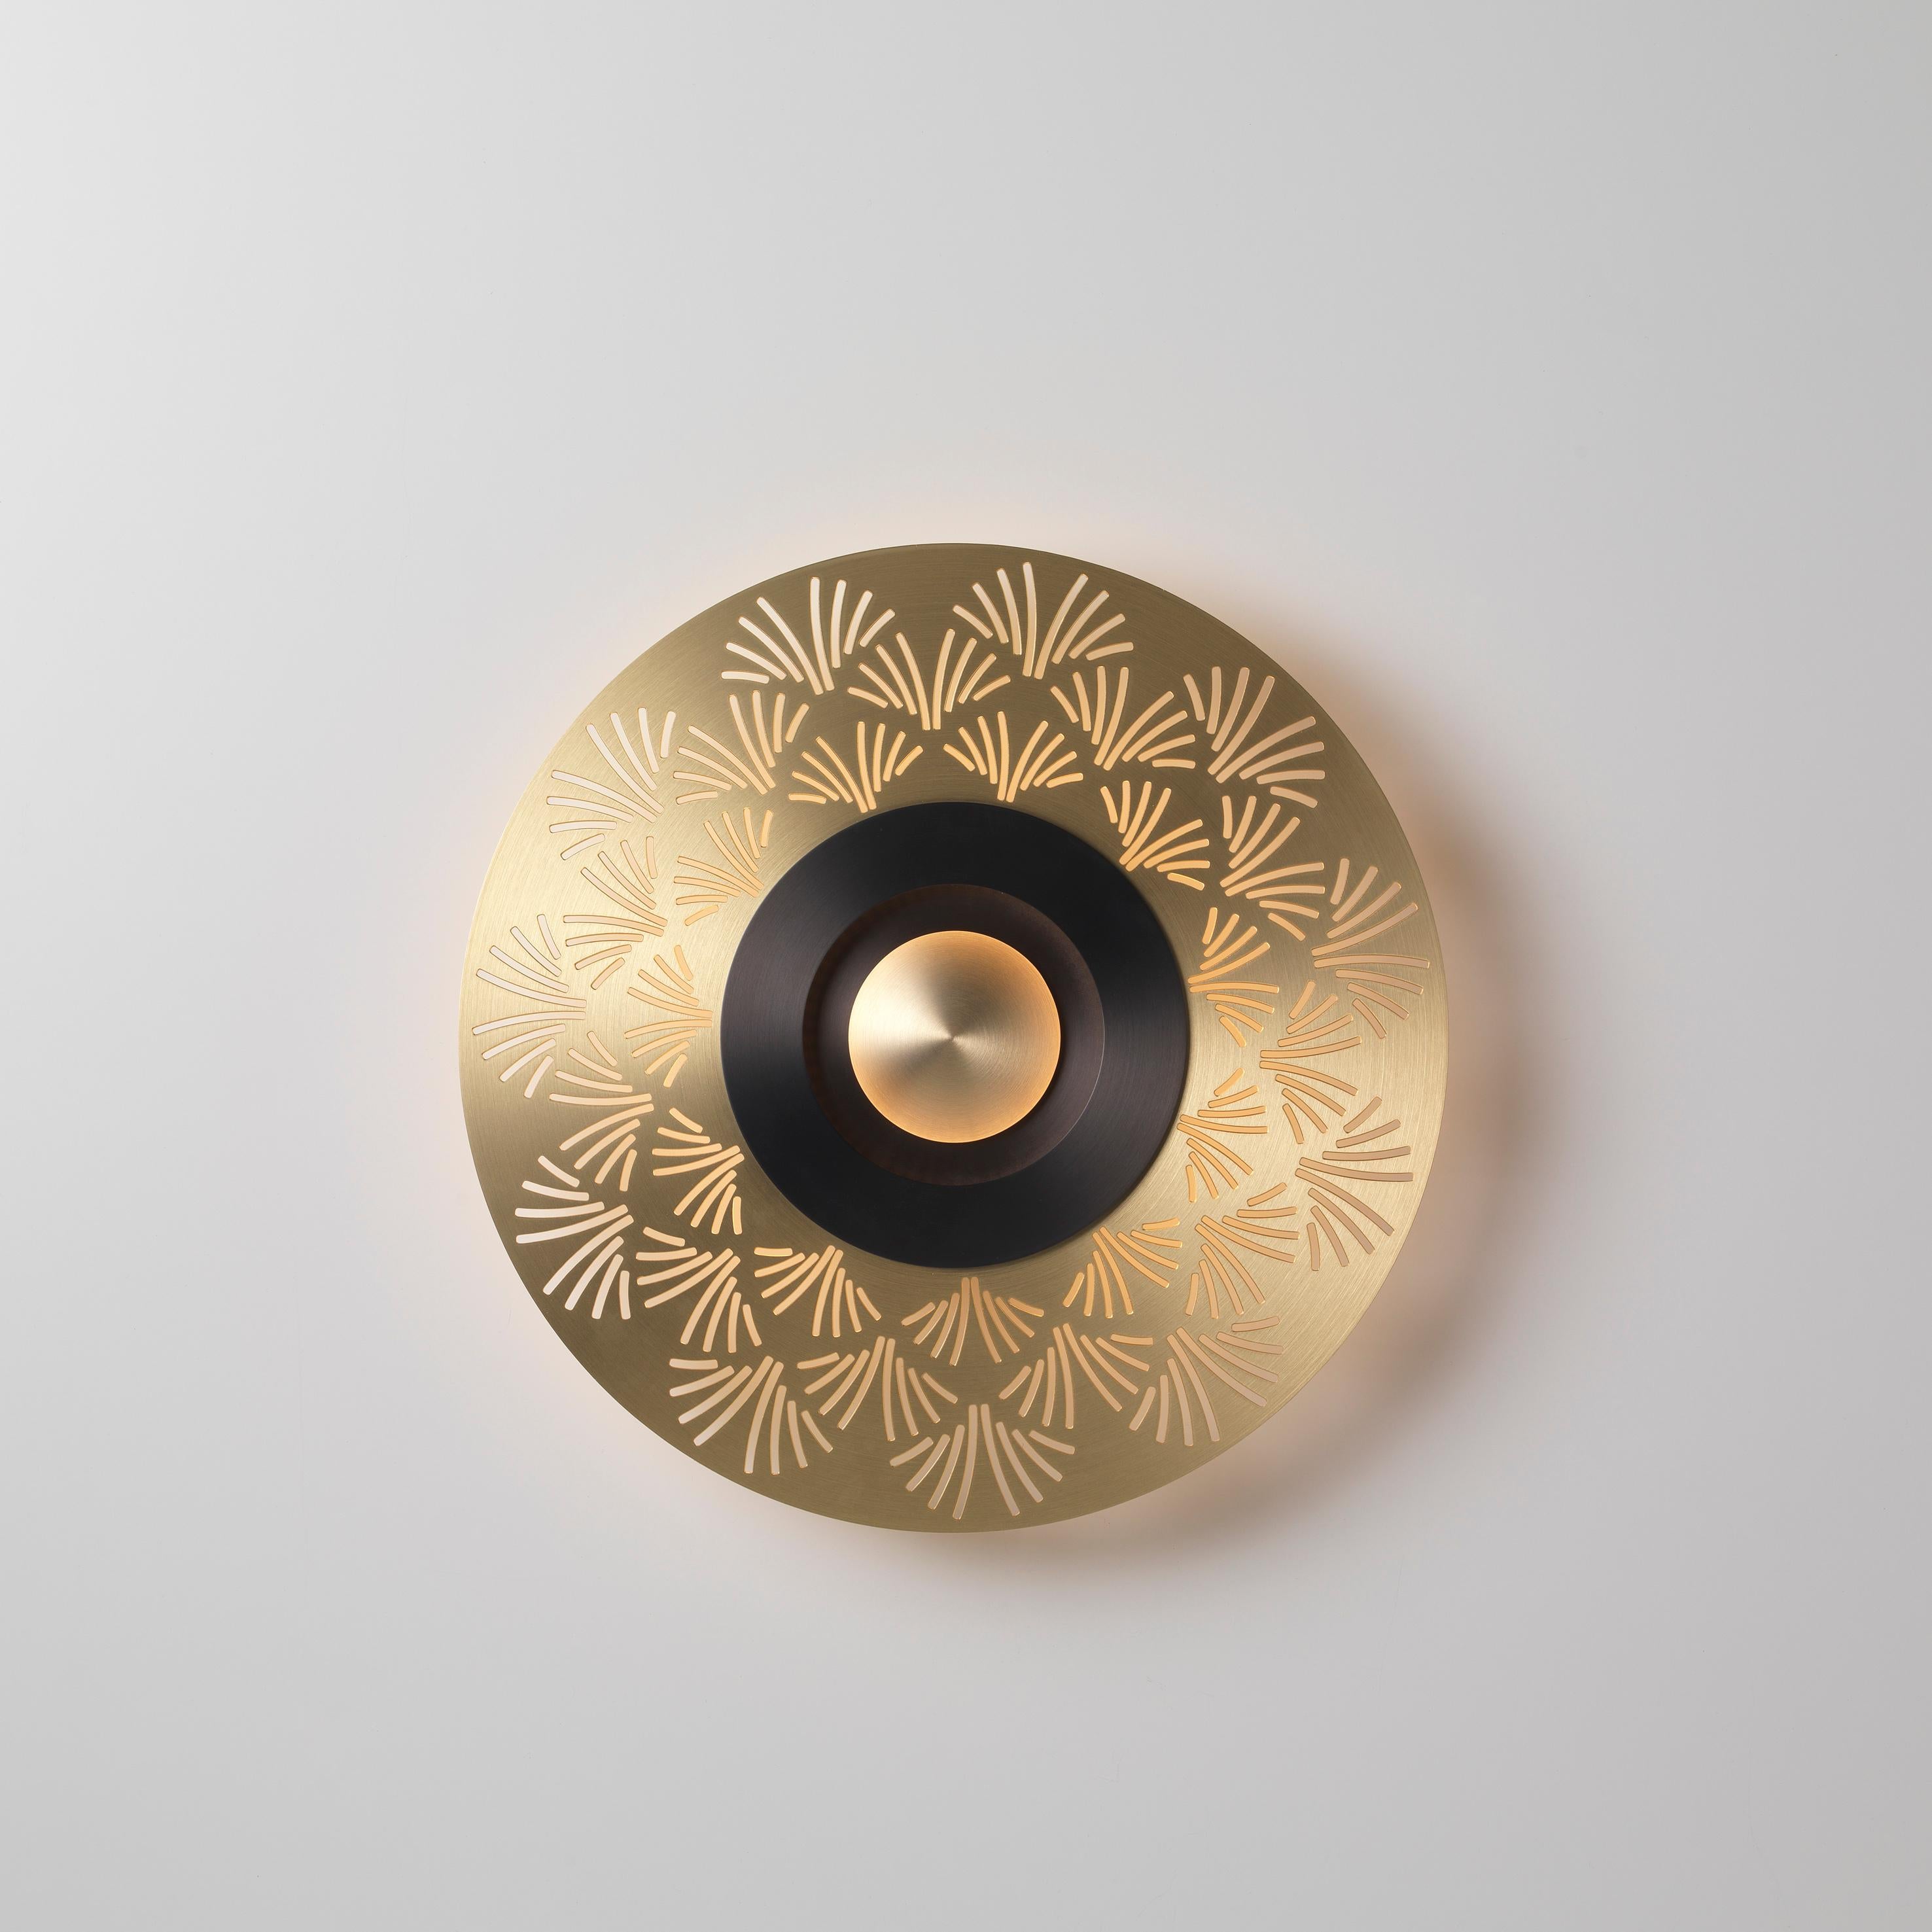 Earth Palm wall light by Emilie Cathelineau
Dimensions: D33 X H5 cm
Materials: Solid brass,Polycarbonate diffuser.
Others finishes and dimensions are available.

All our lamps can be wired according to each country. If sold to the USA it will